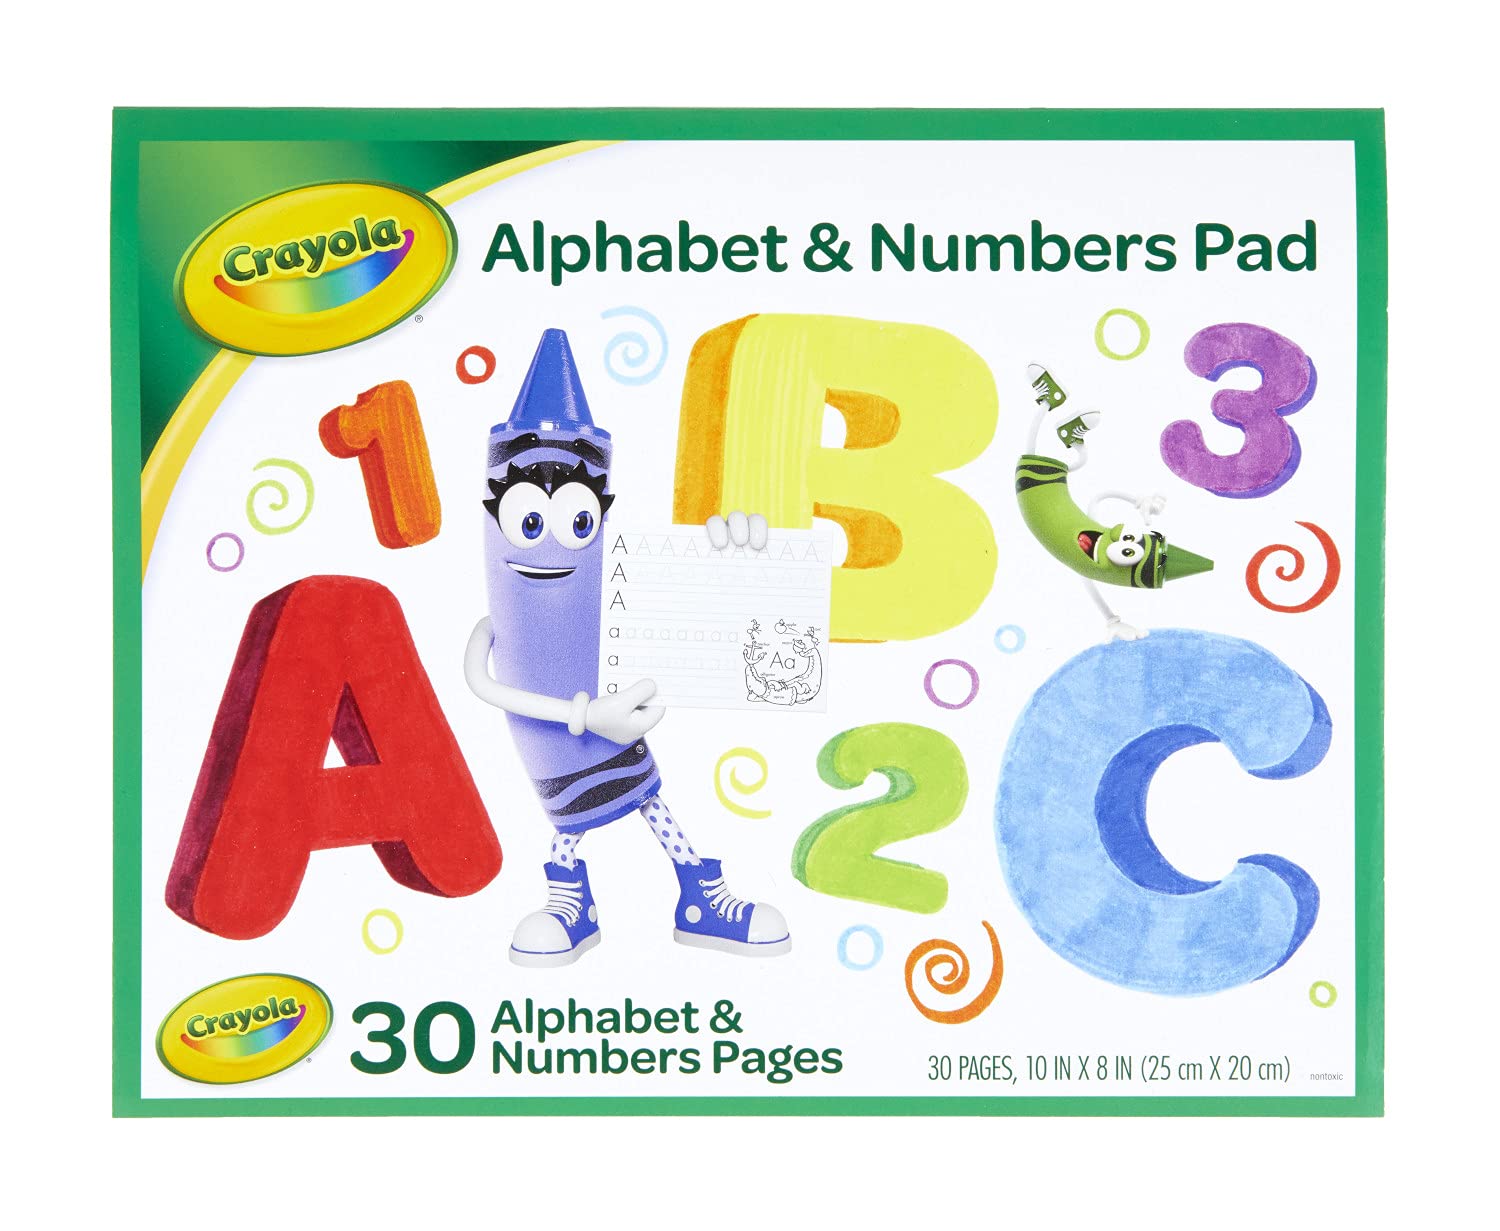 Crayola Alphabet Pad, Tracing Worksheets, 30 Pages, India